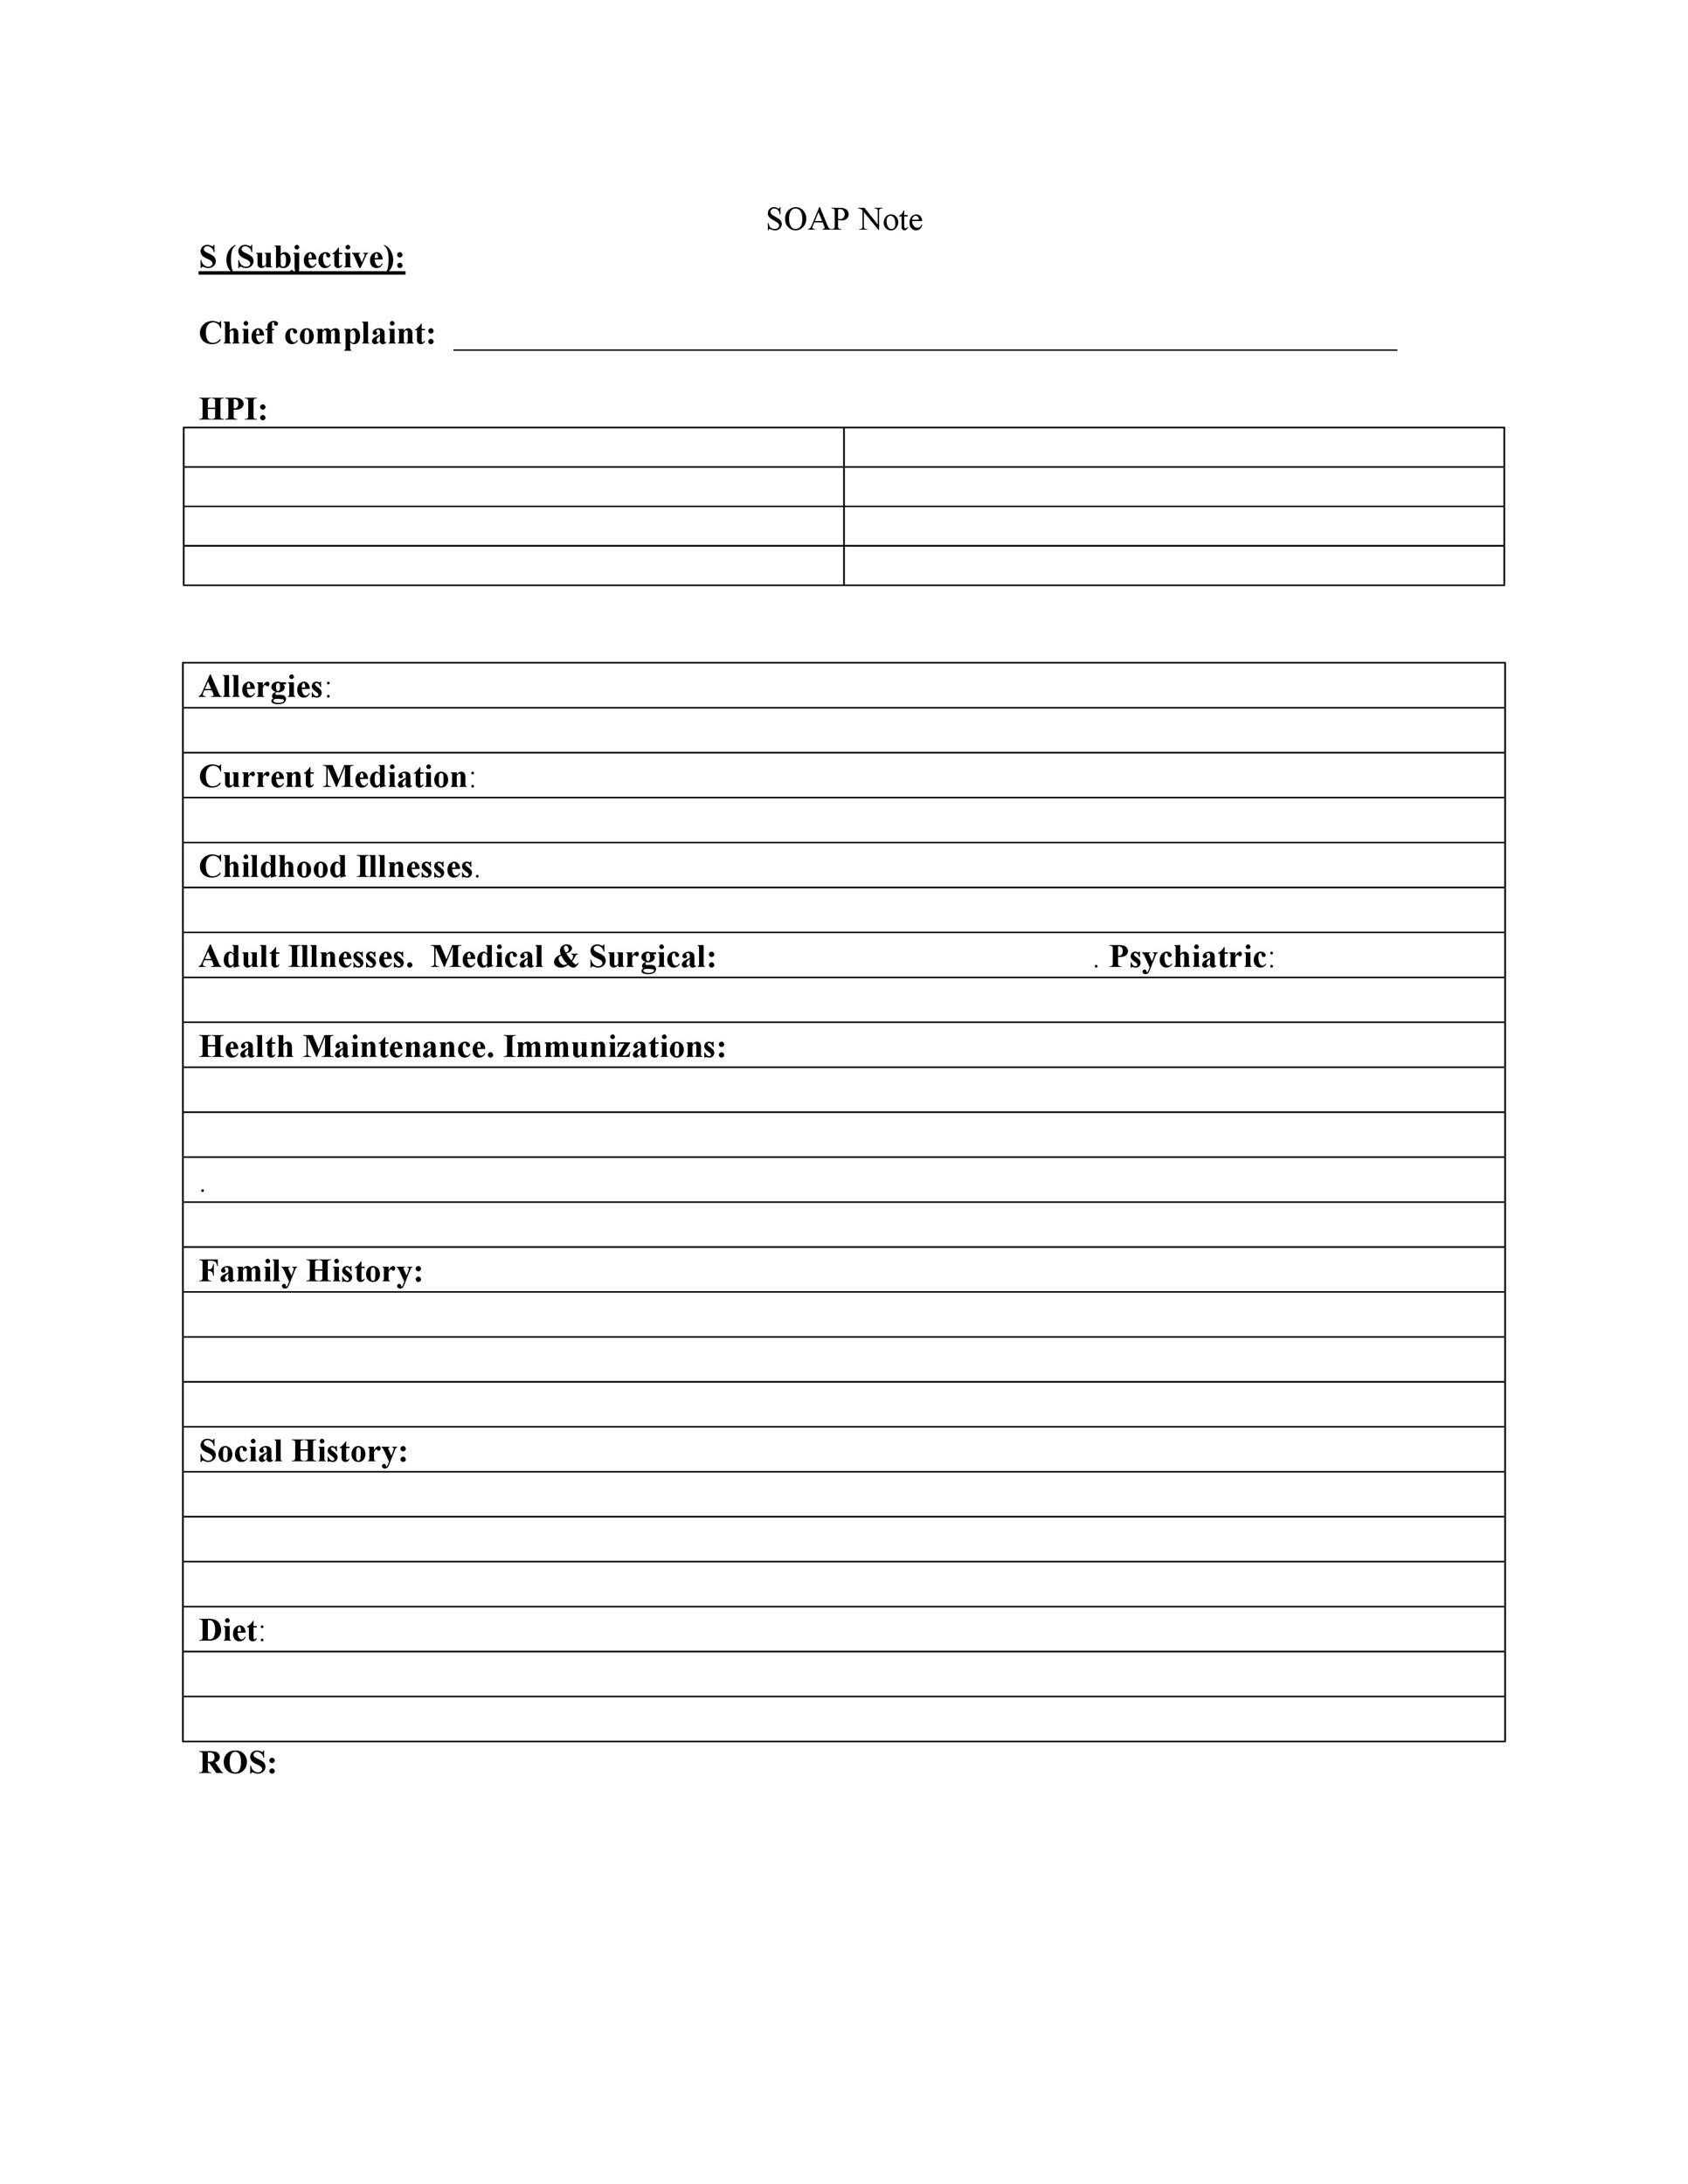 Soap Notes Counseling Template